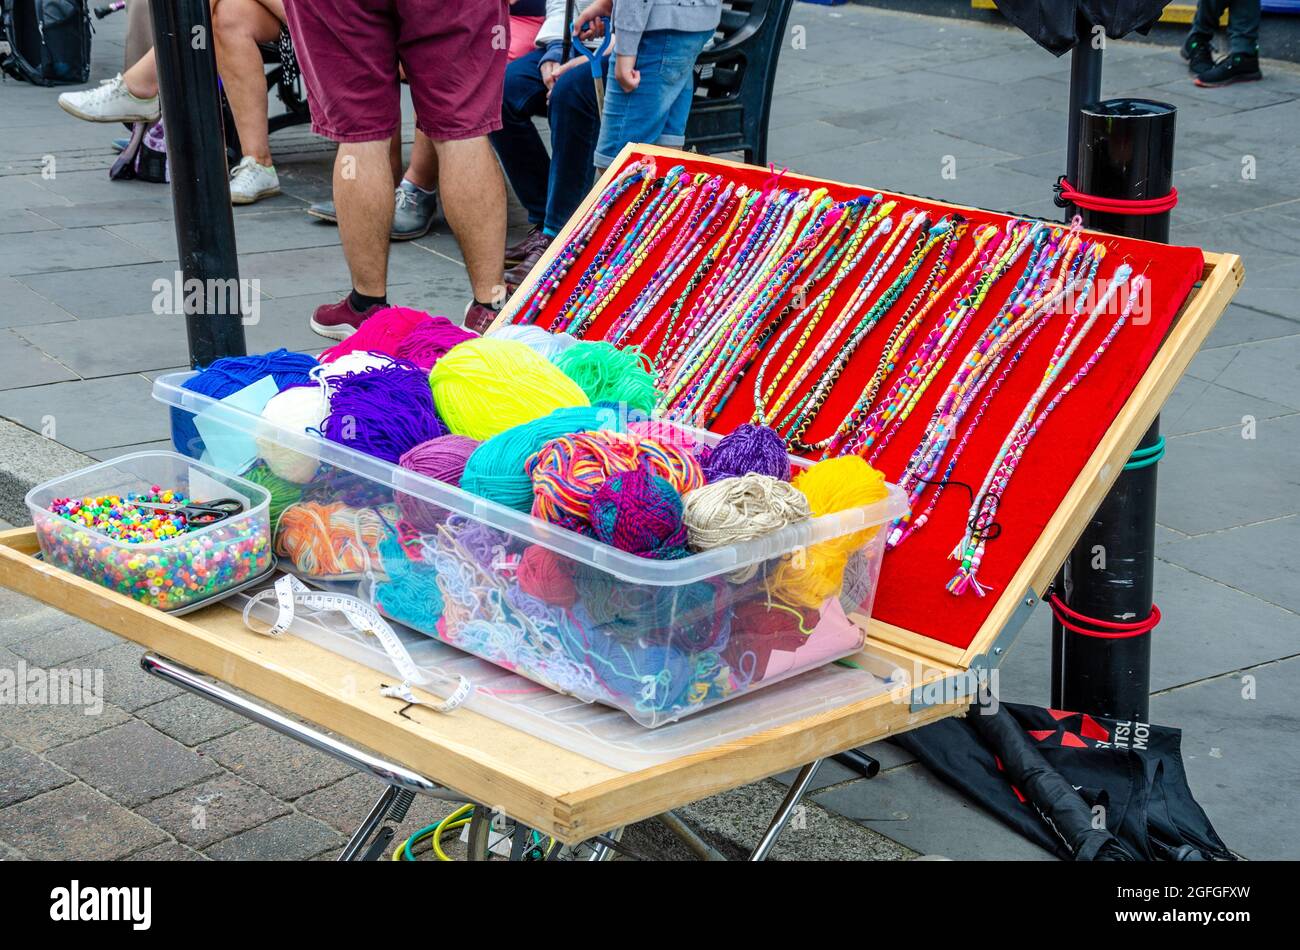 Balls of wool, braids and beads used by a person braiding hair for tourists in the street in Tenby, Wales. Stock Photo